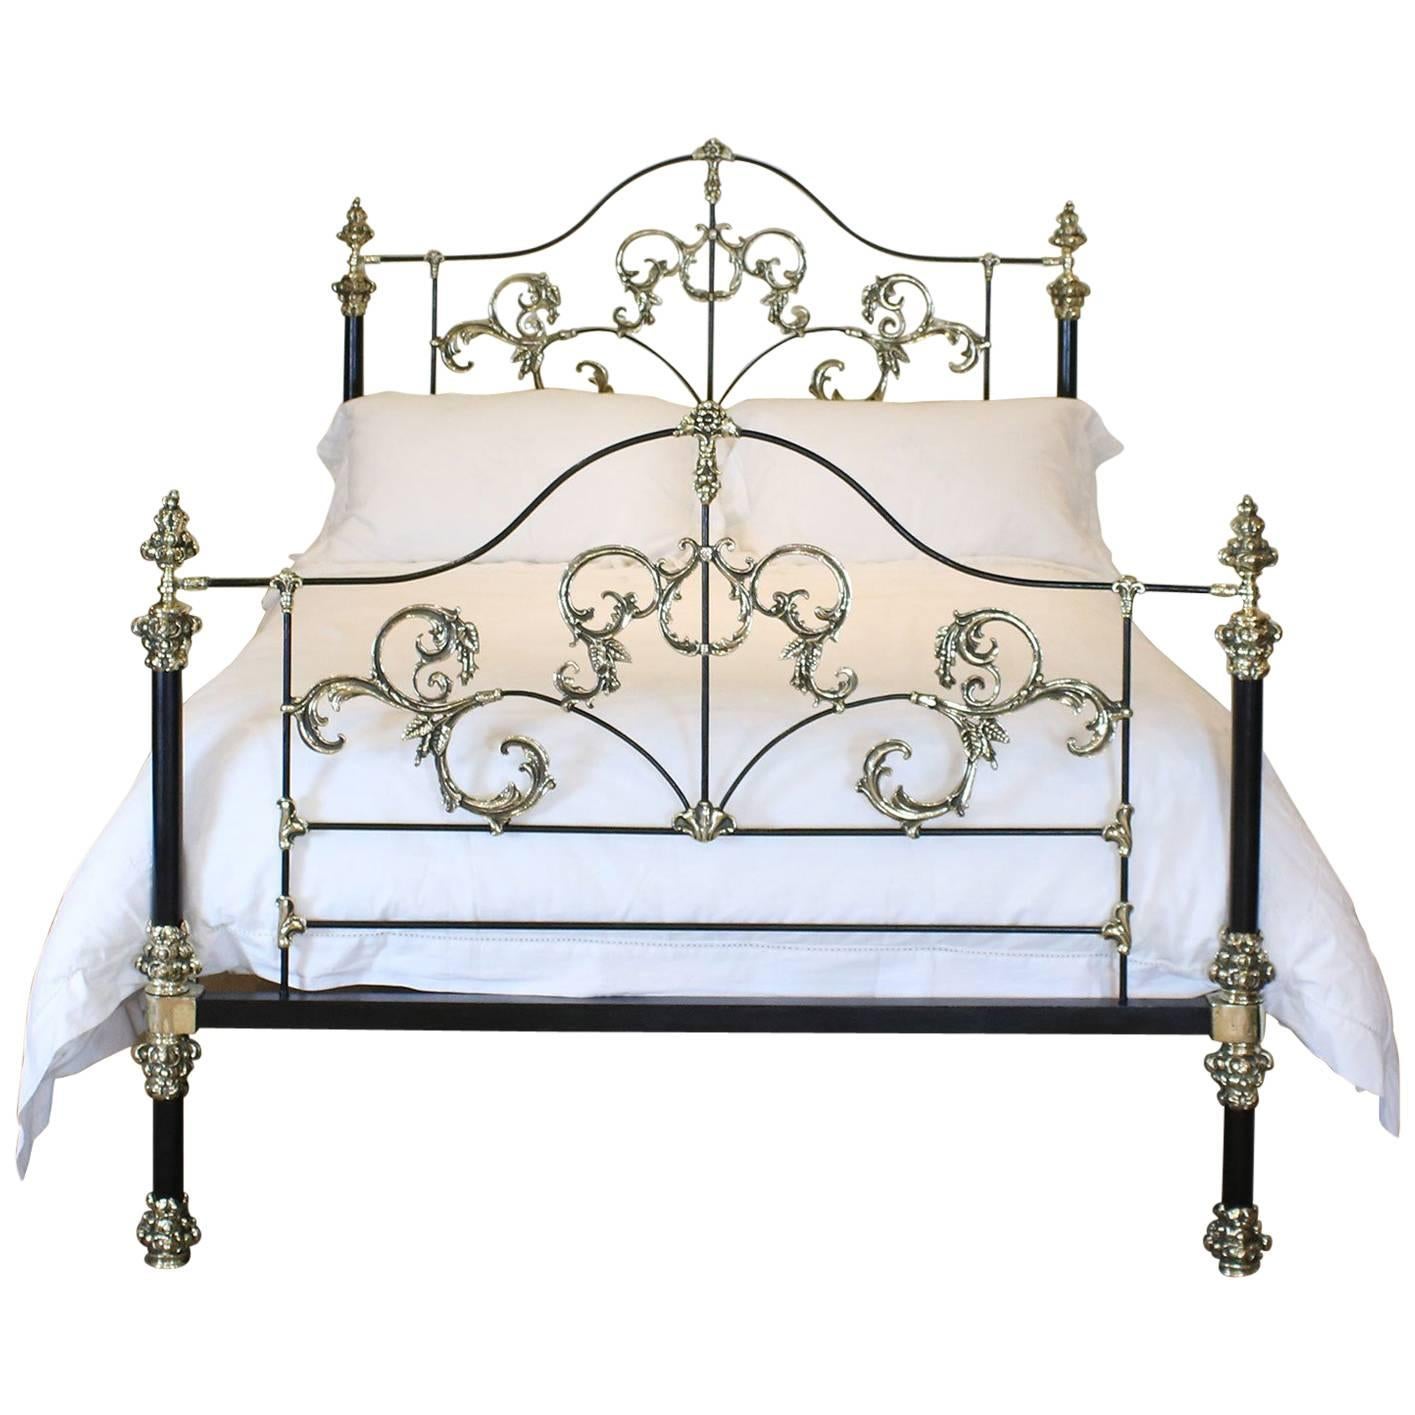 Bespoke Brass and Iron Tangier Bed - Tangier 1